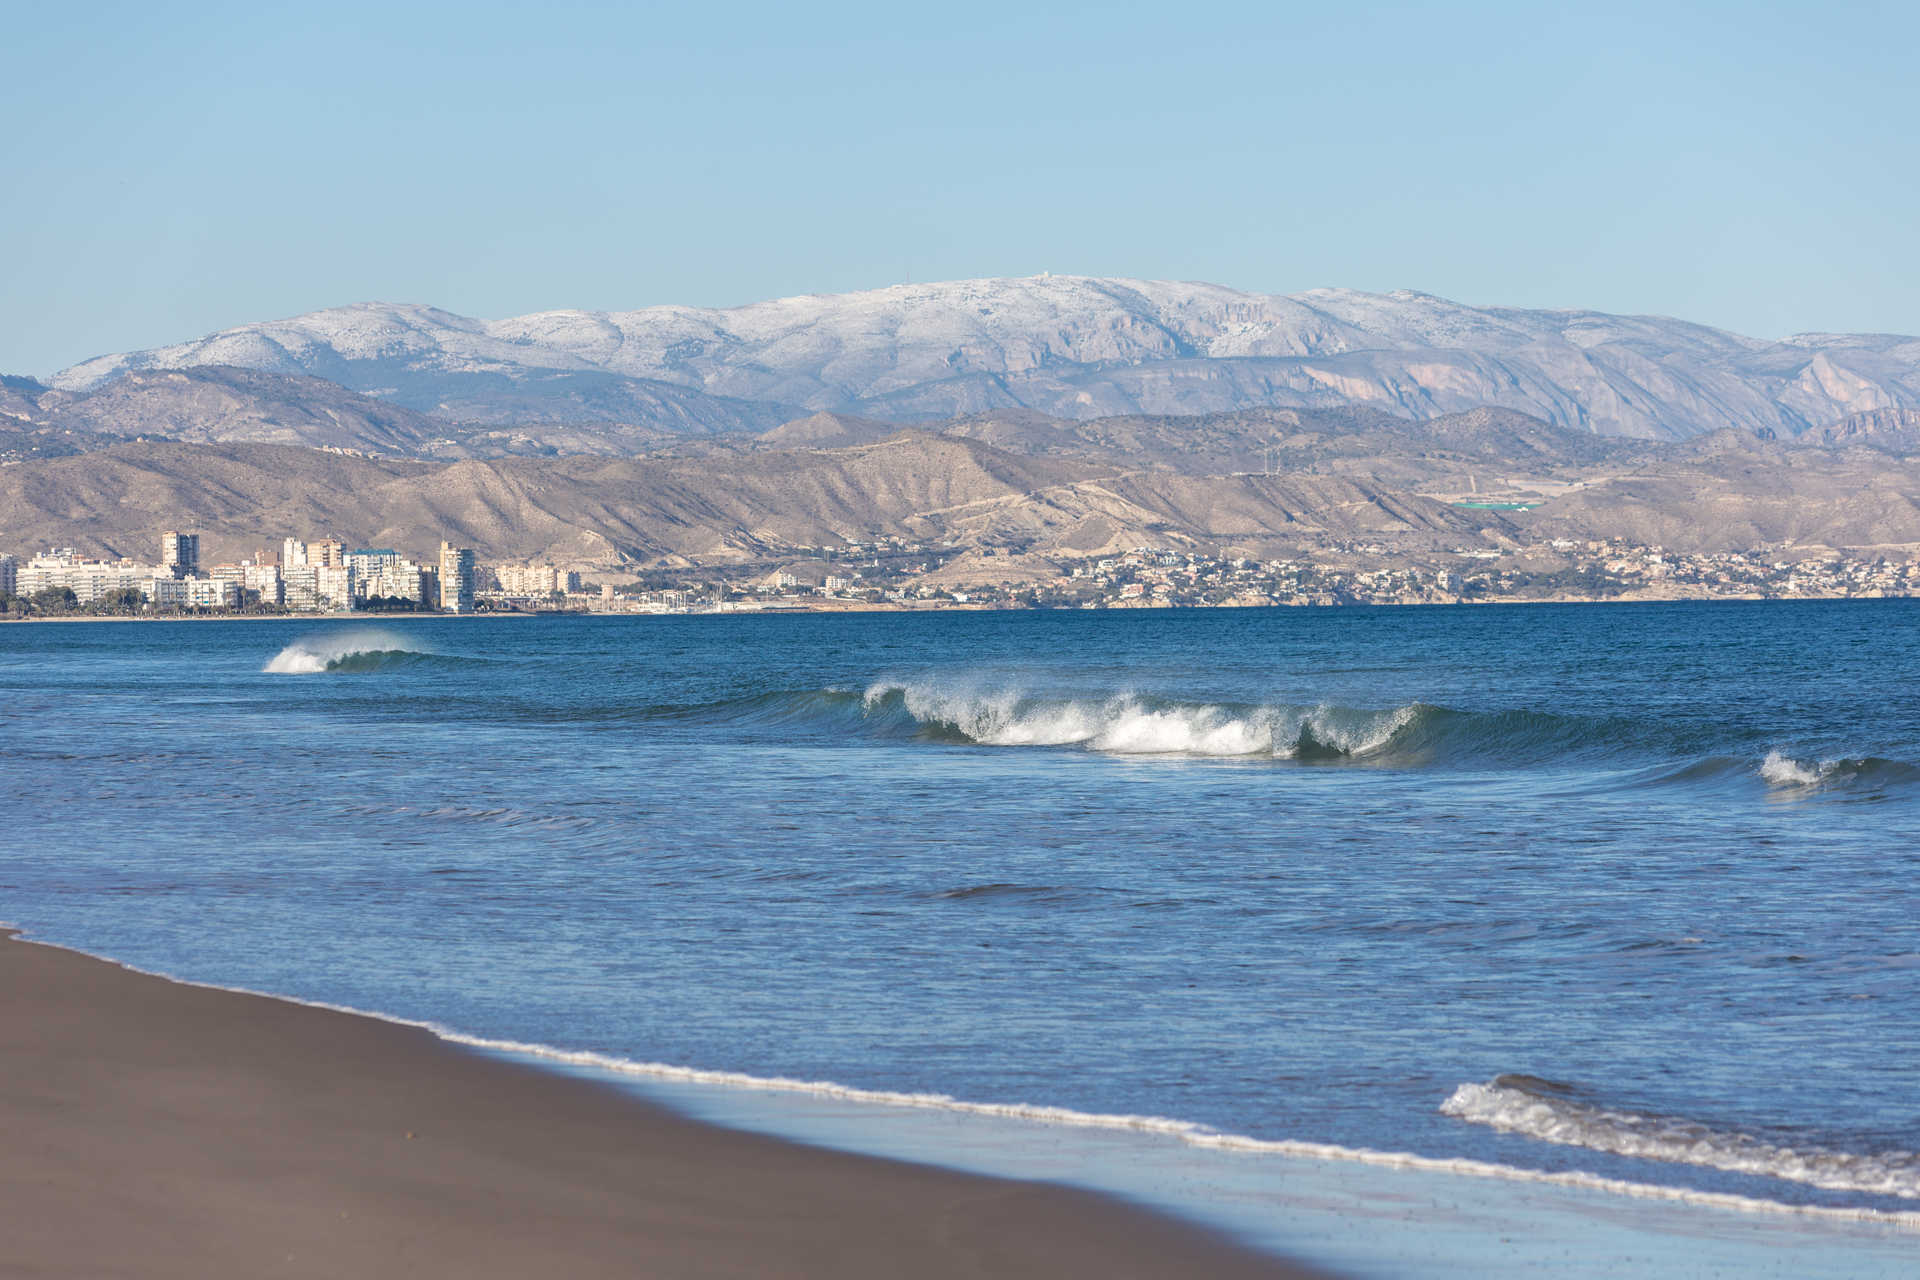 The waves of Playa de Sant Joan with the mountains in the background.